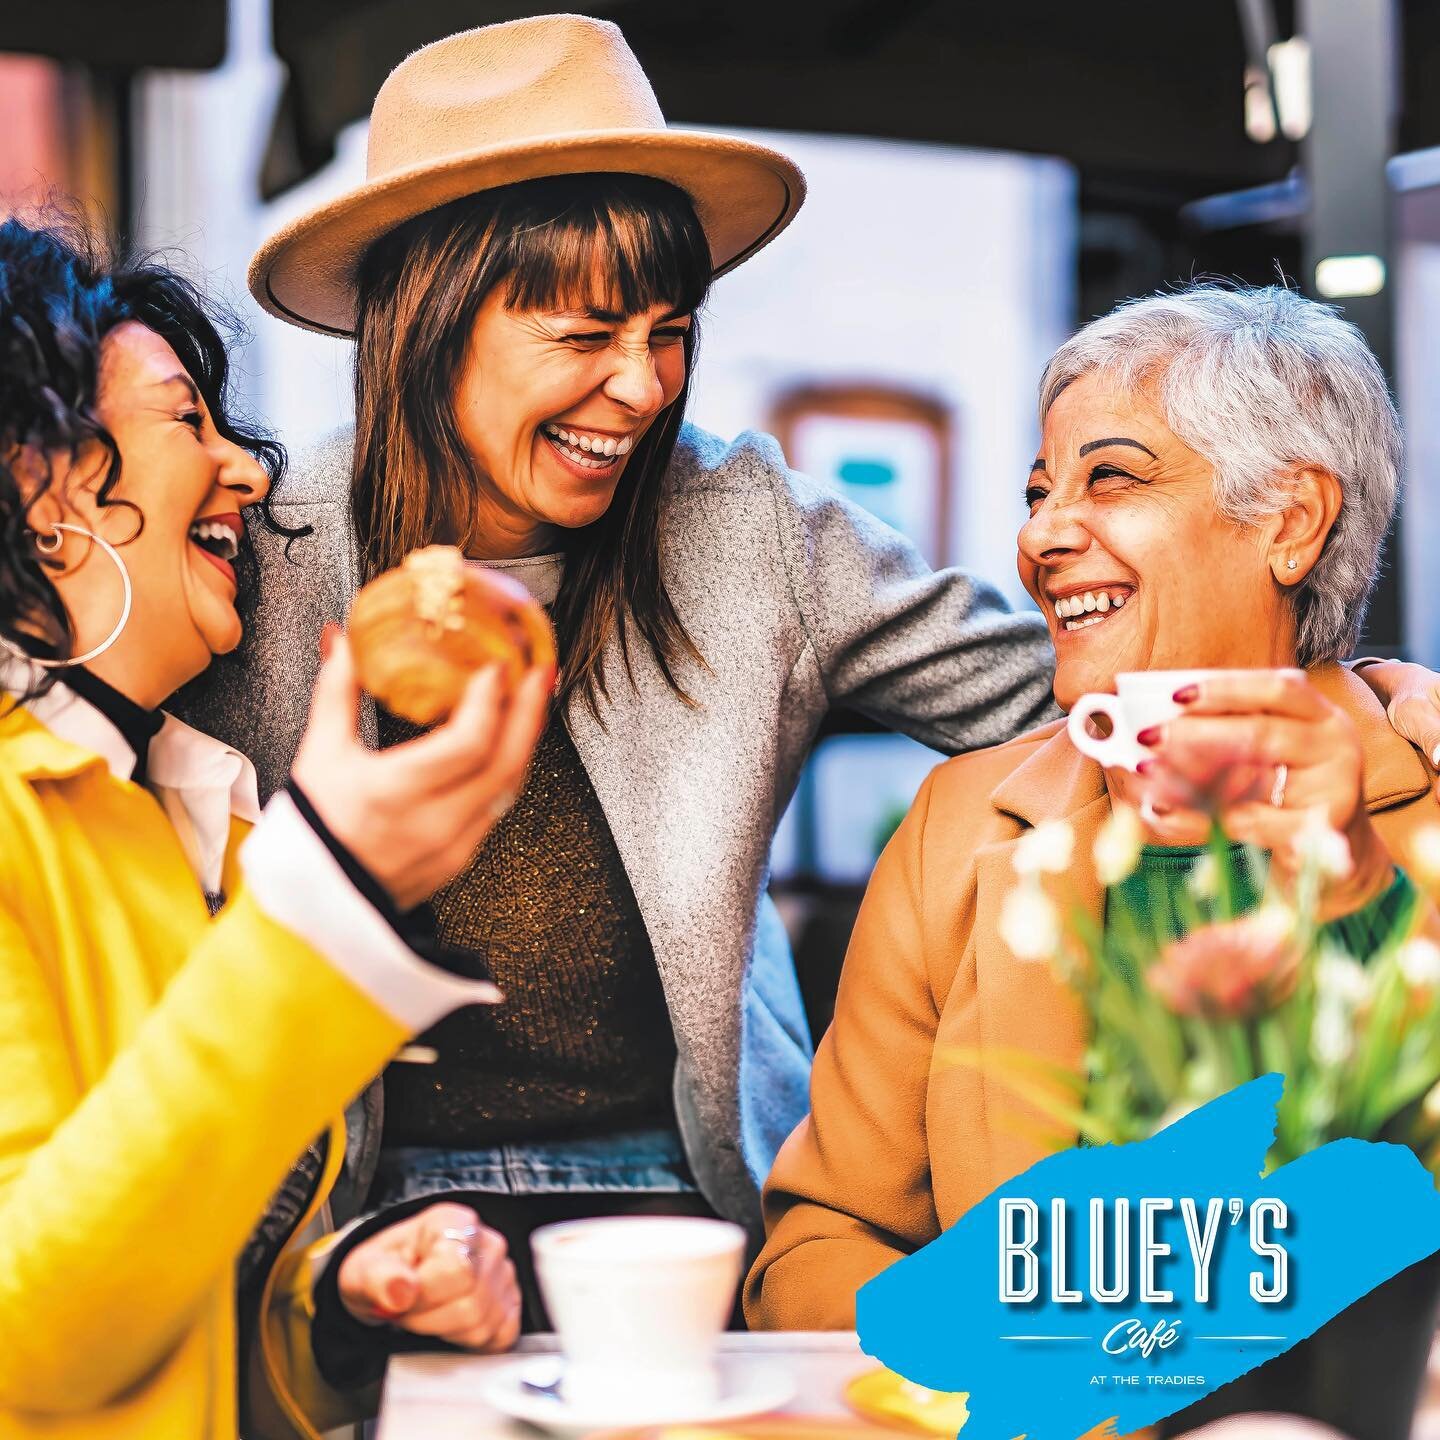 Looking for a cozy spot to grab some delicious coffee and fresh food? 

Look no further than Bluey's Cafe! Our warm and welcoming atmosphere is the perfect place to relax, catch up with friends, or get some work done. Our baristas craft each cup of c